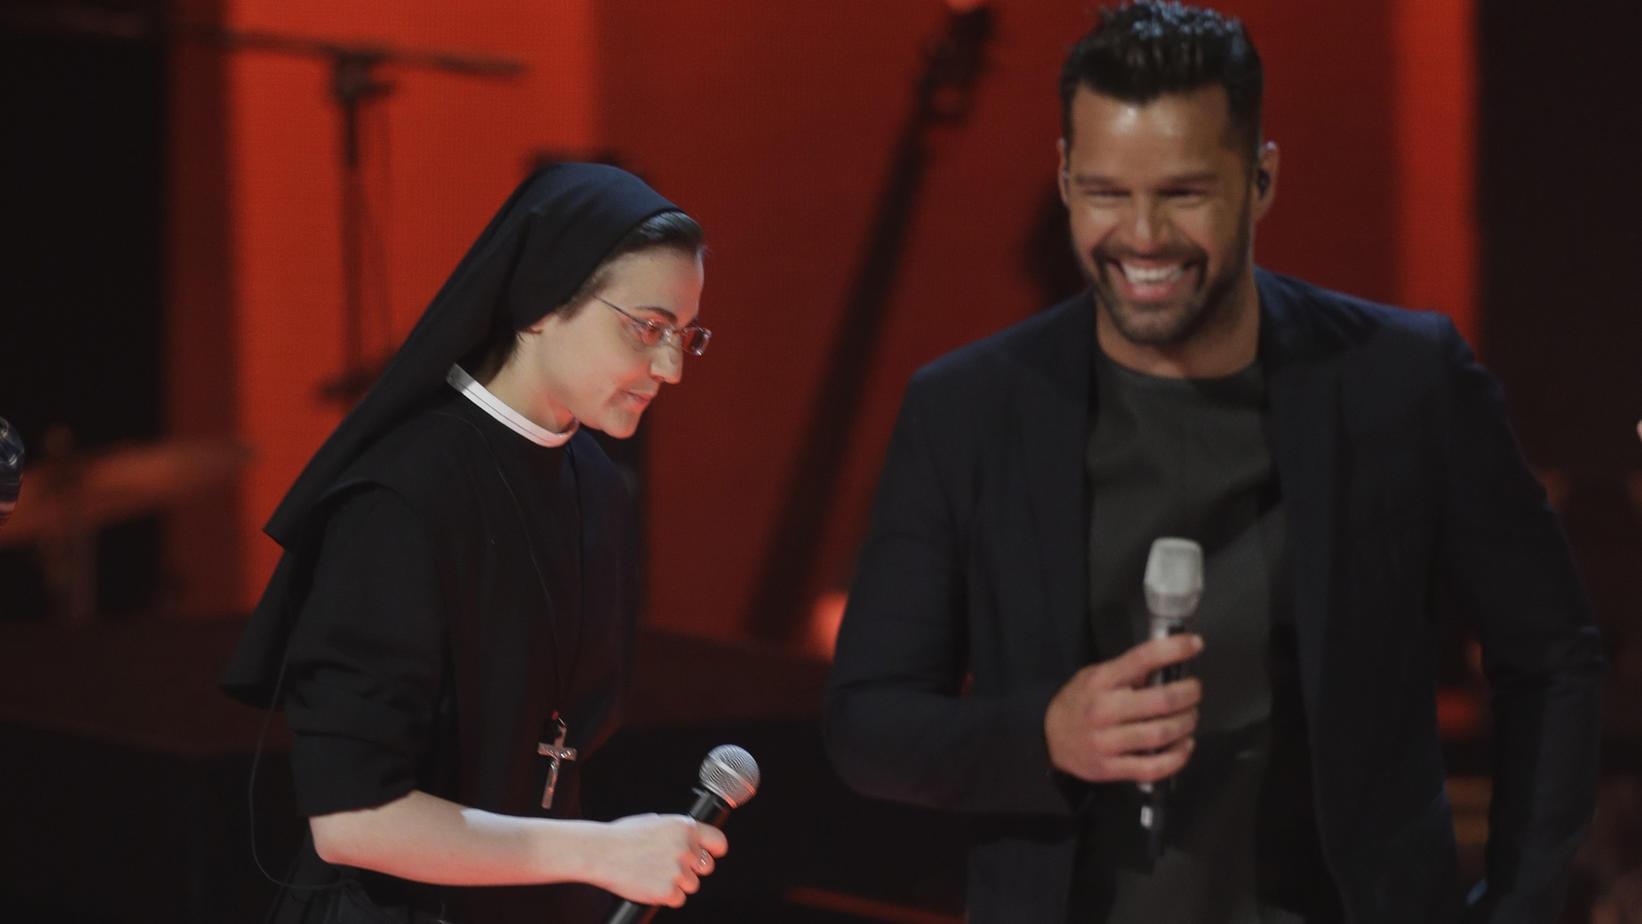 Italian singer Suor Cristina Scuccia, left, and Ricky Martin perform during the Italian State RAI TV program The Voice of Italy, in Milan, Italy, Wednesday, May 28, 2014. (AP Photo/Luca Bruno)